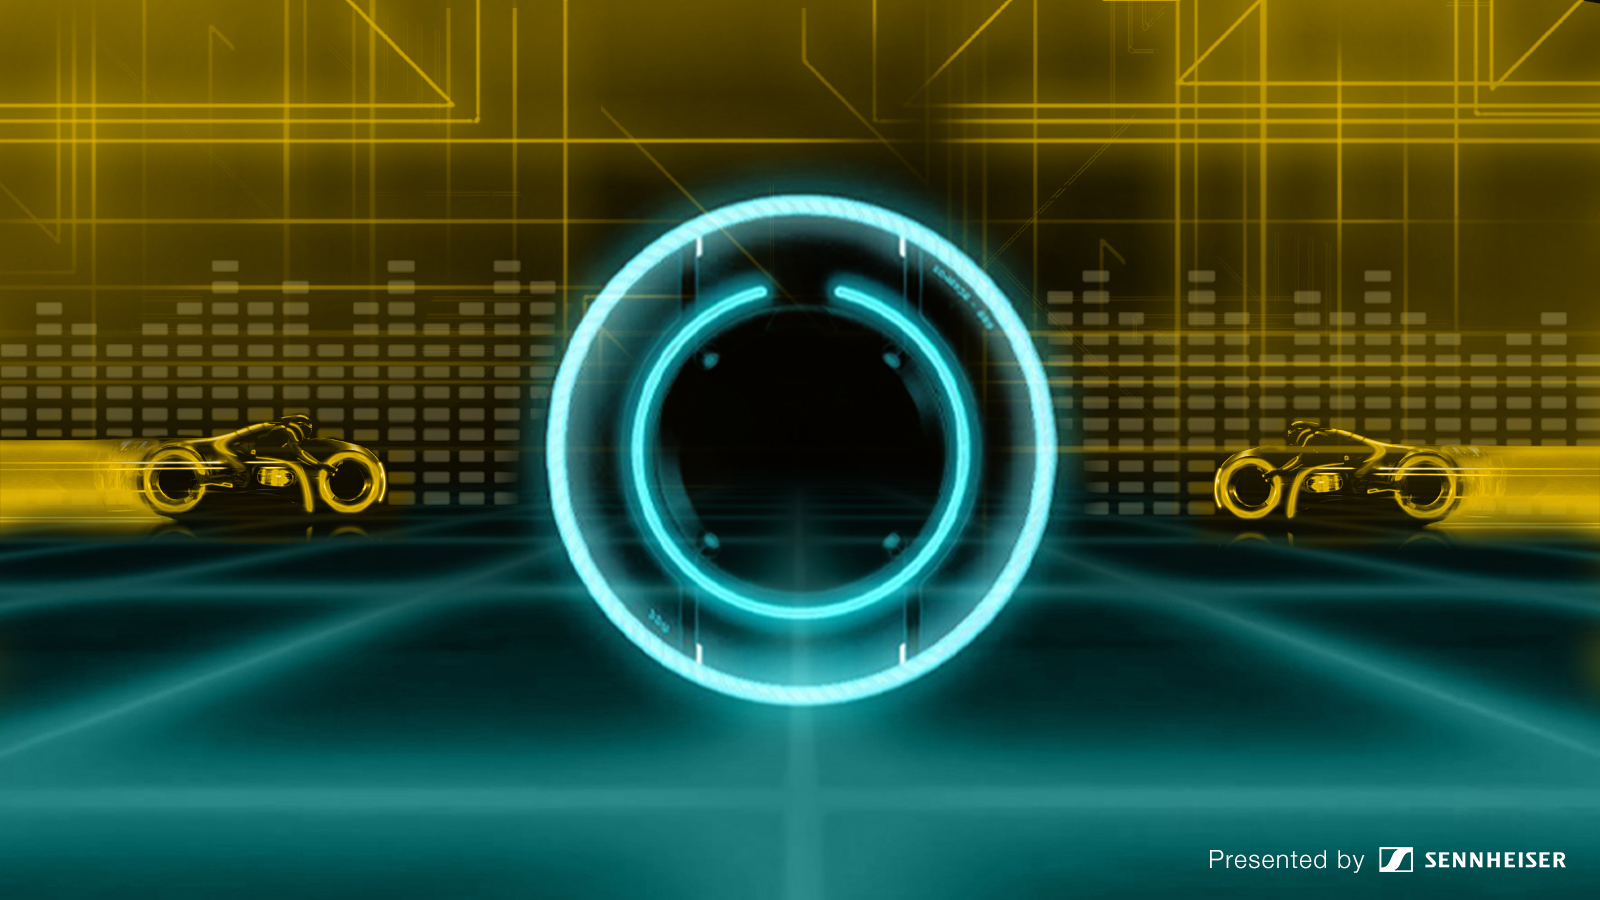 stylized illustration of neon glowing tron legacy elements over graphics representing a stereo equalizer